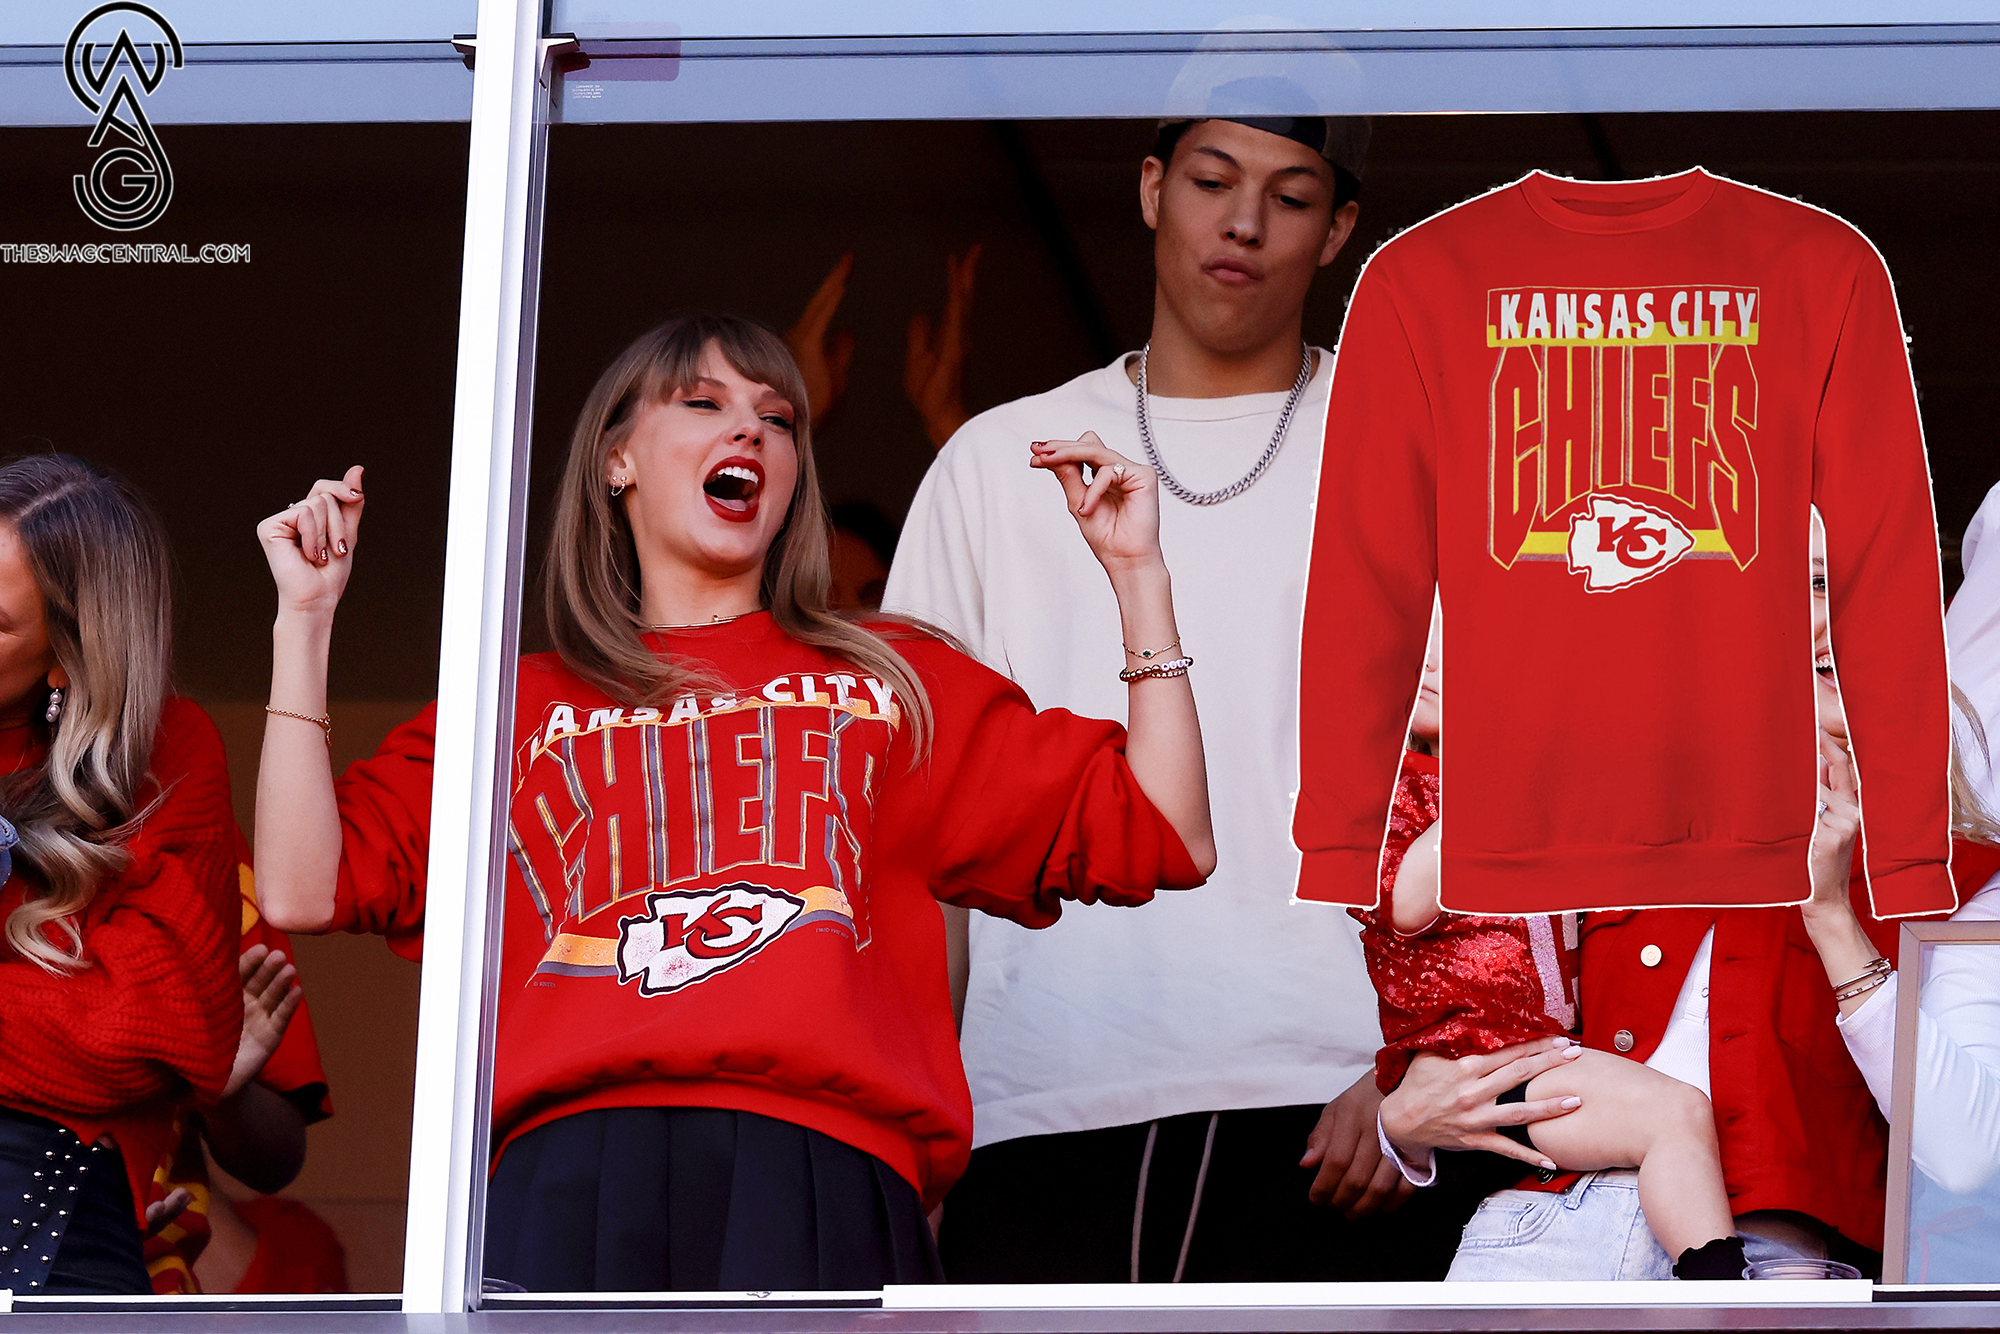 Taylor Swift Touches Down in Kansas City: A Star-Studded Night at the Chiefs Game